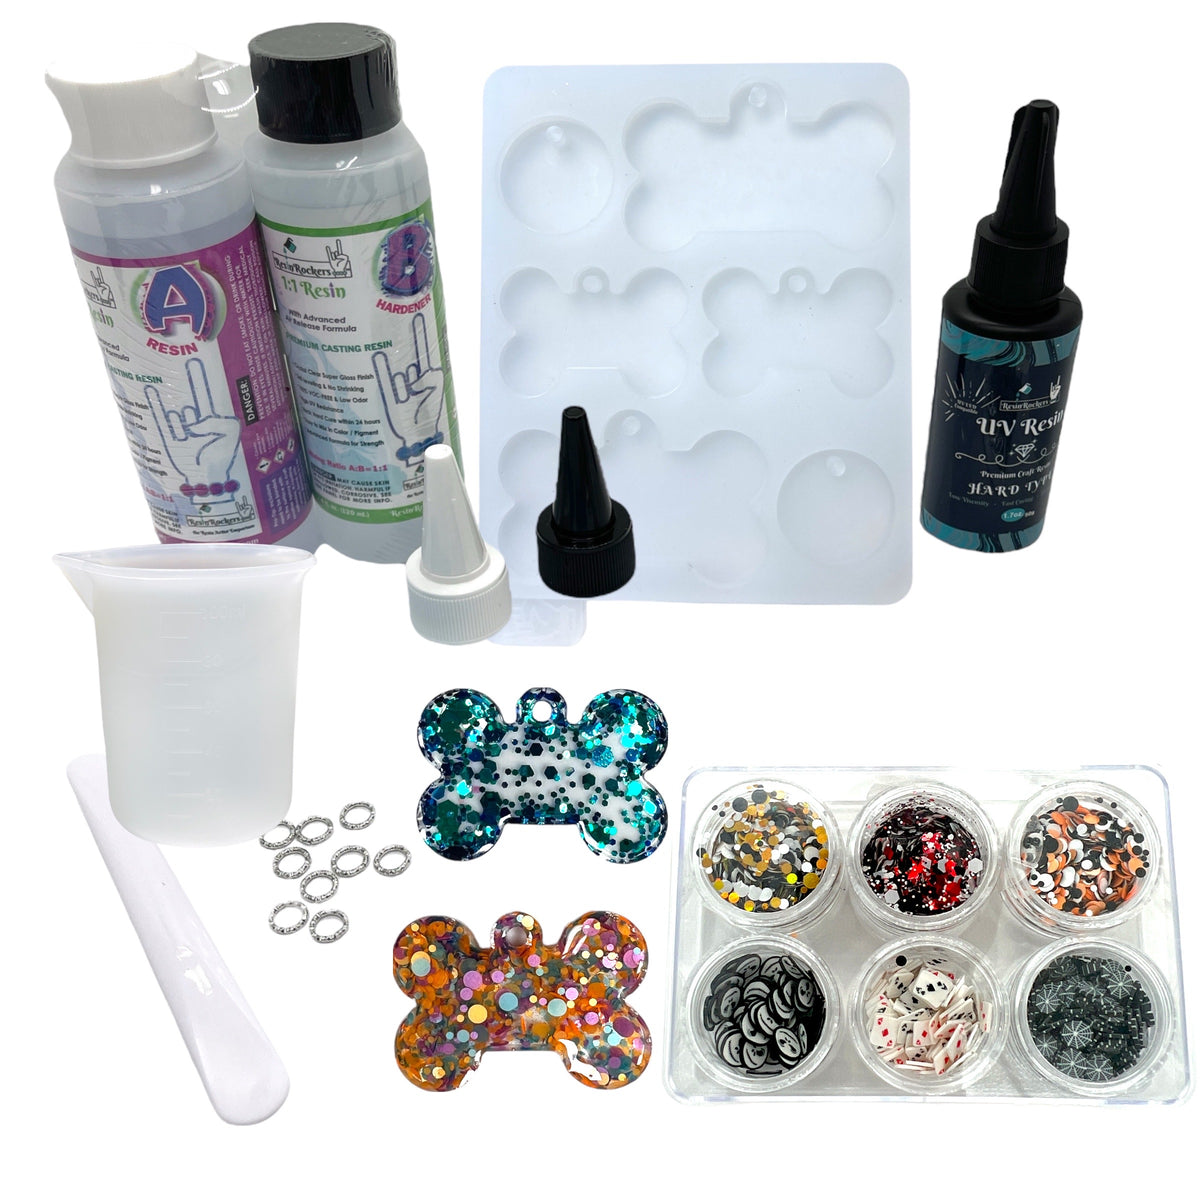 Dog Tag Crafting Kit with Exclusive Resin Rockers UV Safe Mold and Mor